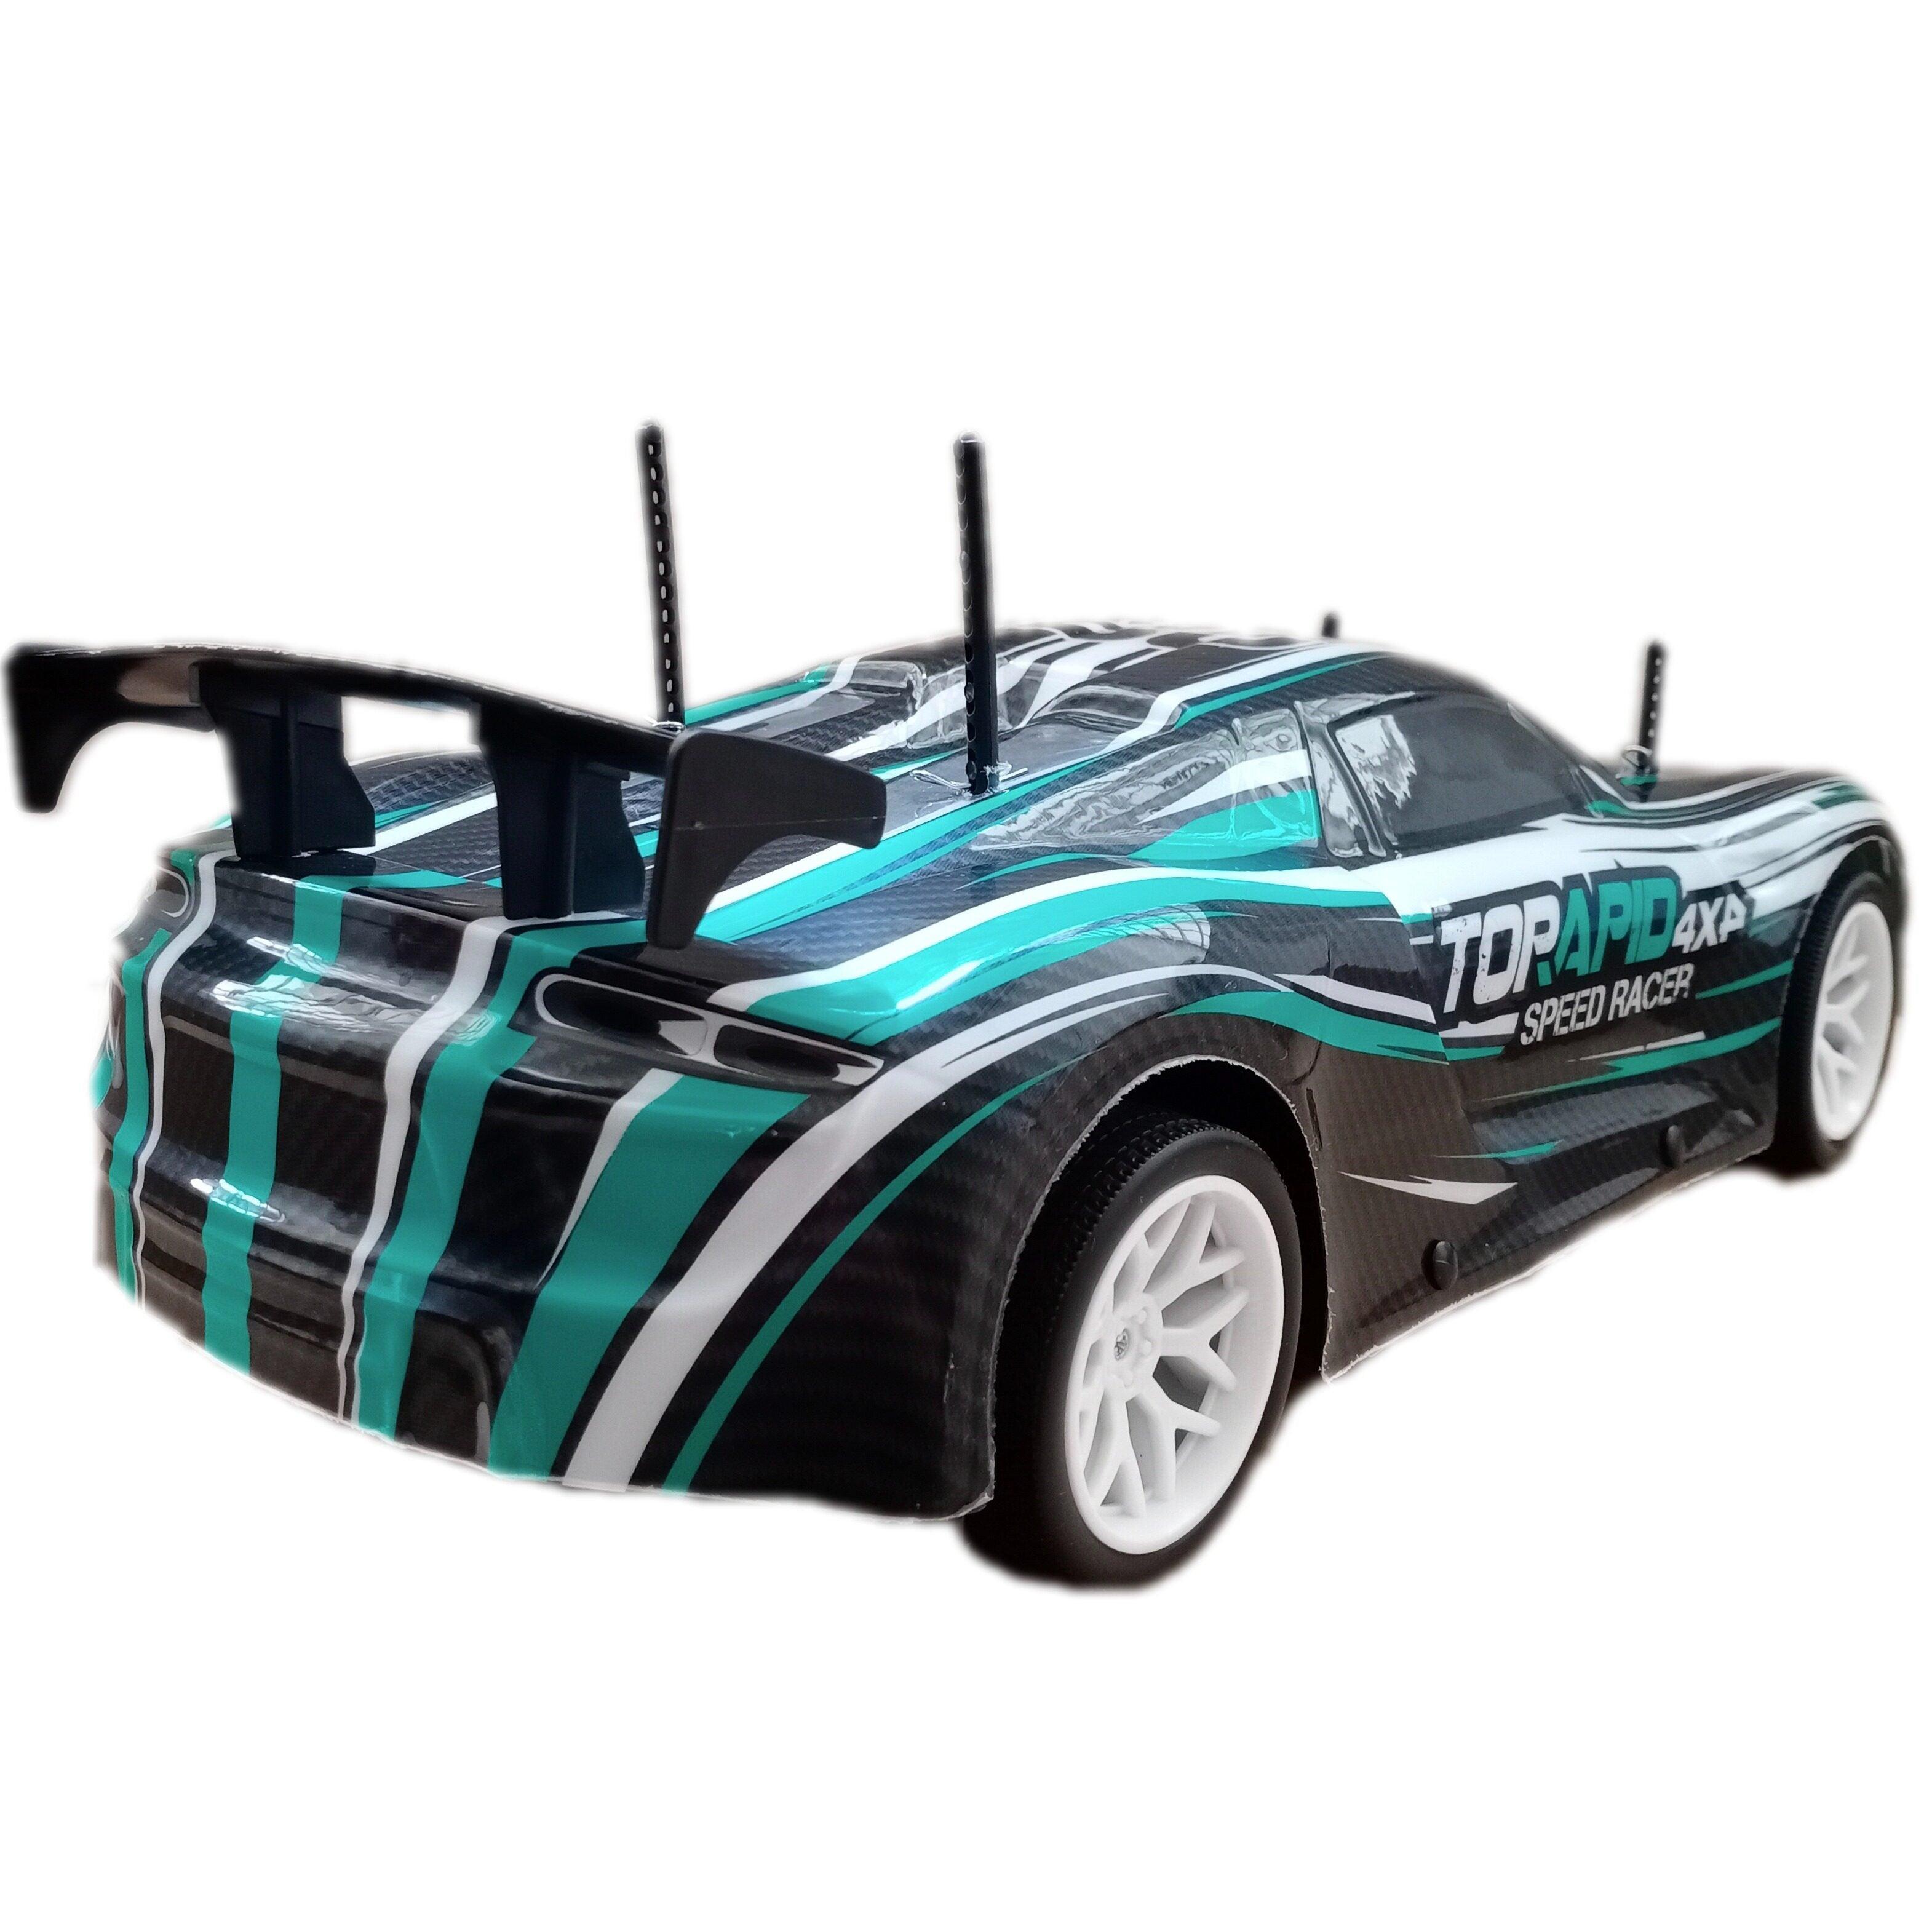 RC Racing Car Savage Racing Champion 1:10 Scale 2.4G On-Road Remote Control Car - Ourkids - OKO